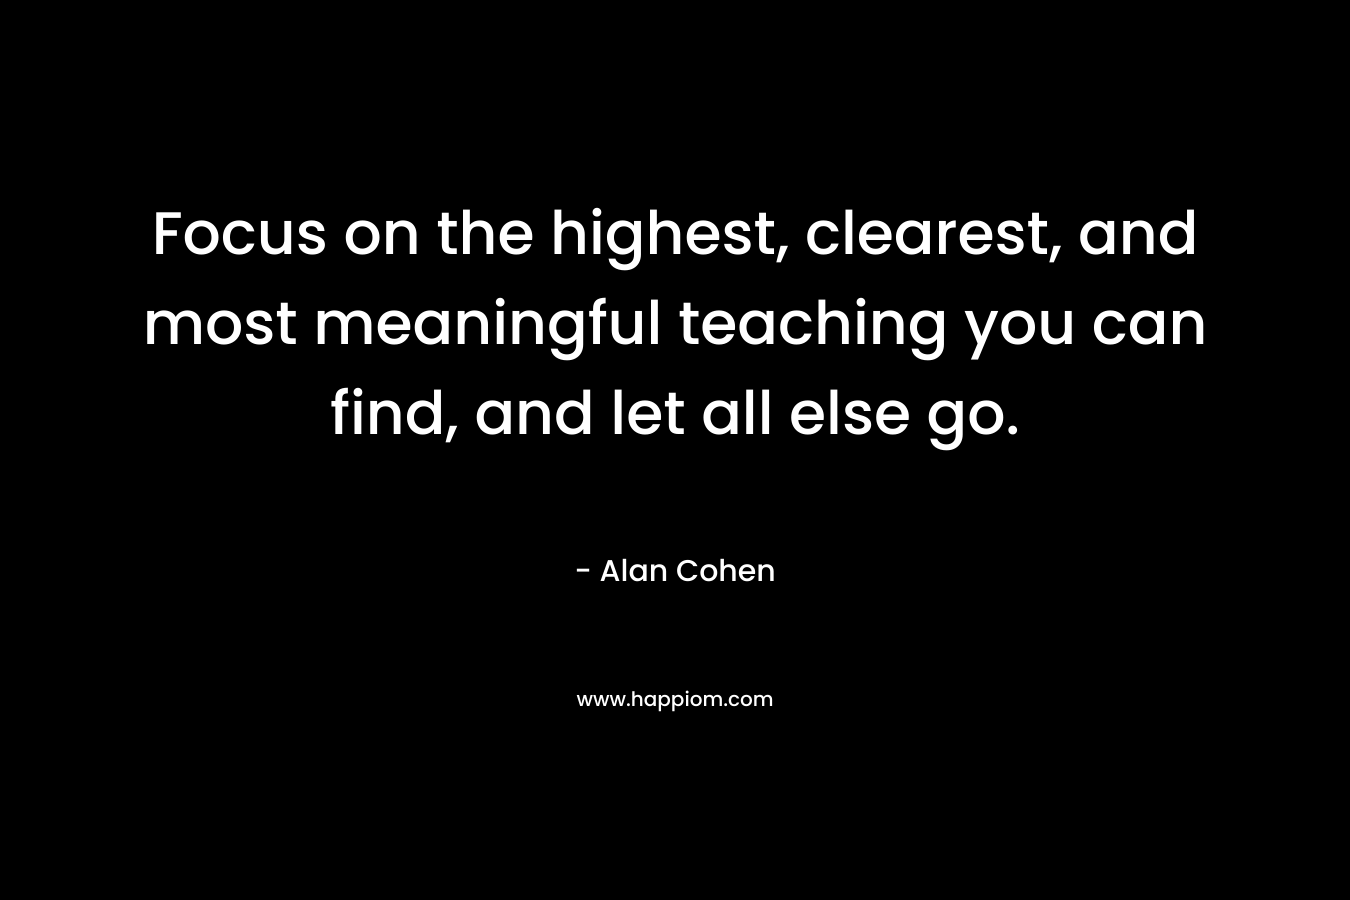 Focus on the highest, clearest, and most meaningful teaching you can find, and let all else go.